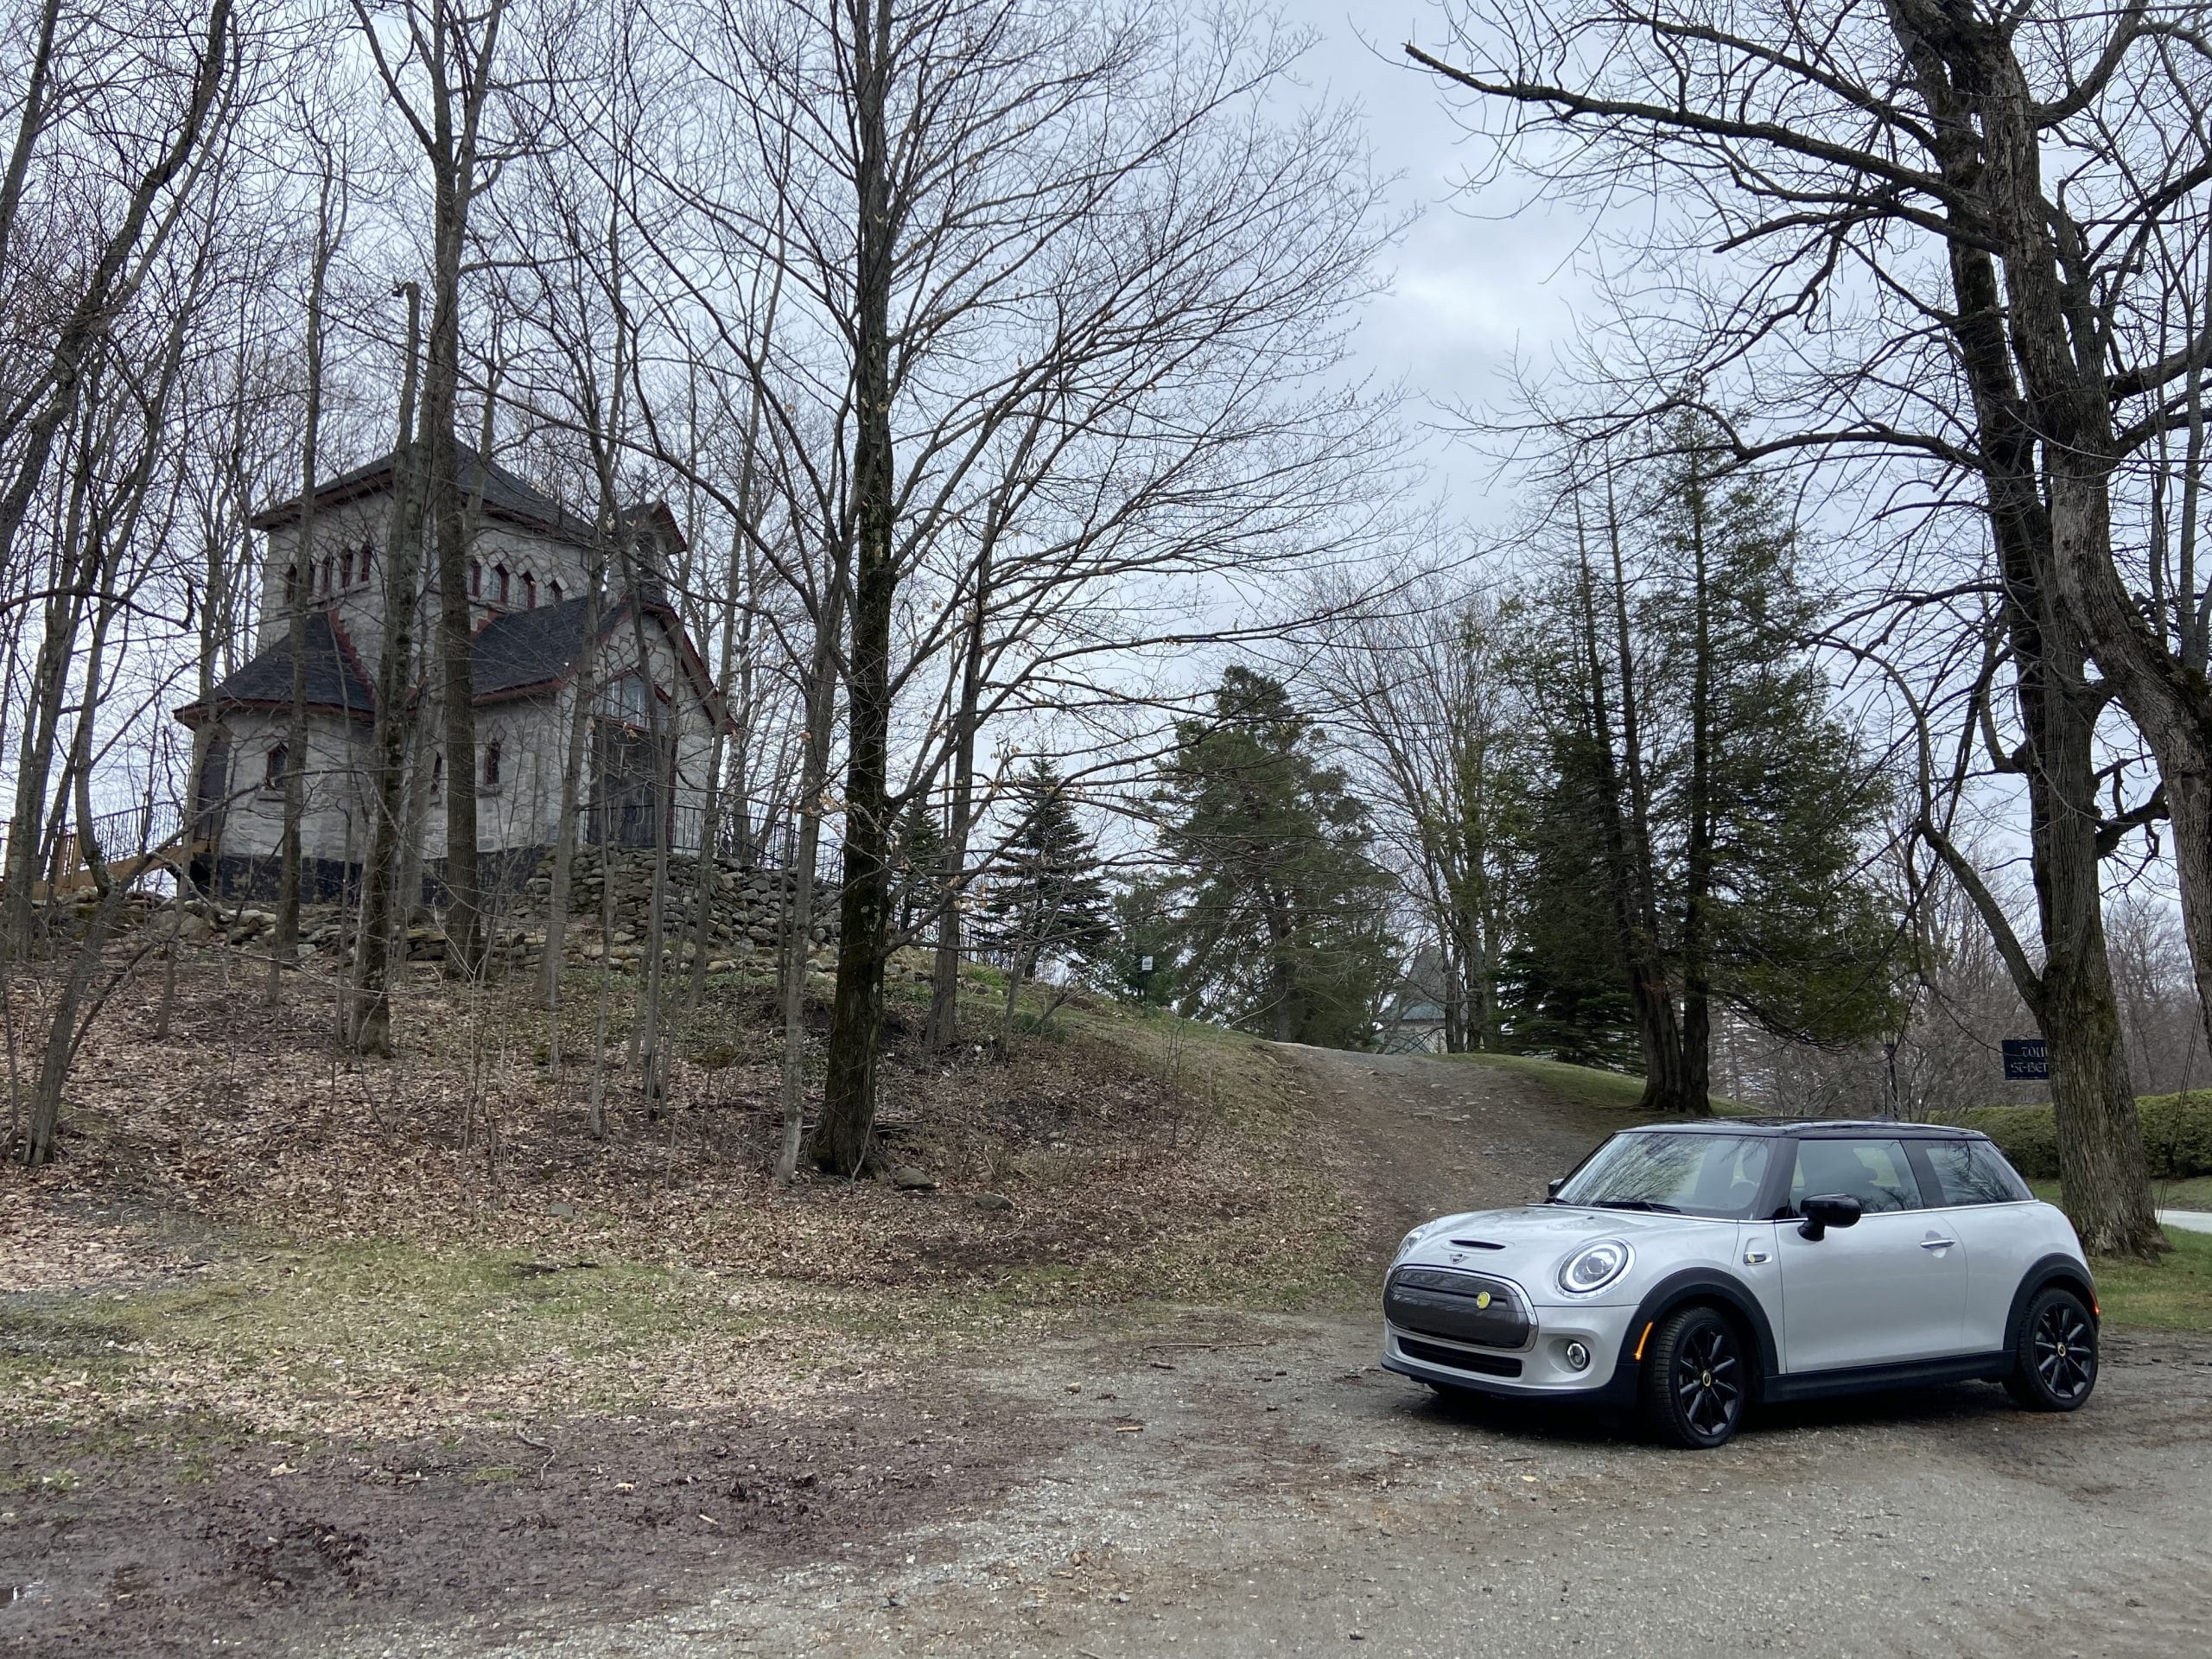 2021 MINI Cooper SE 100% electric in front of a Québec cheese factory